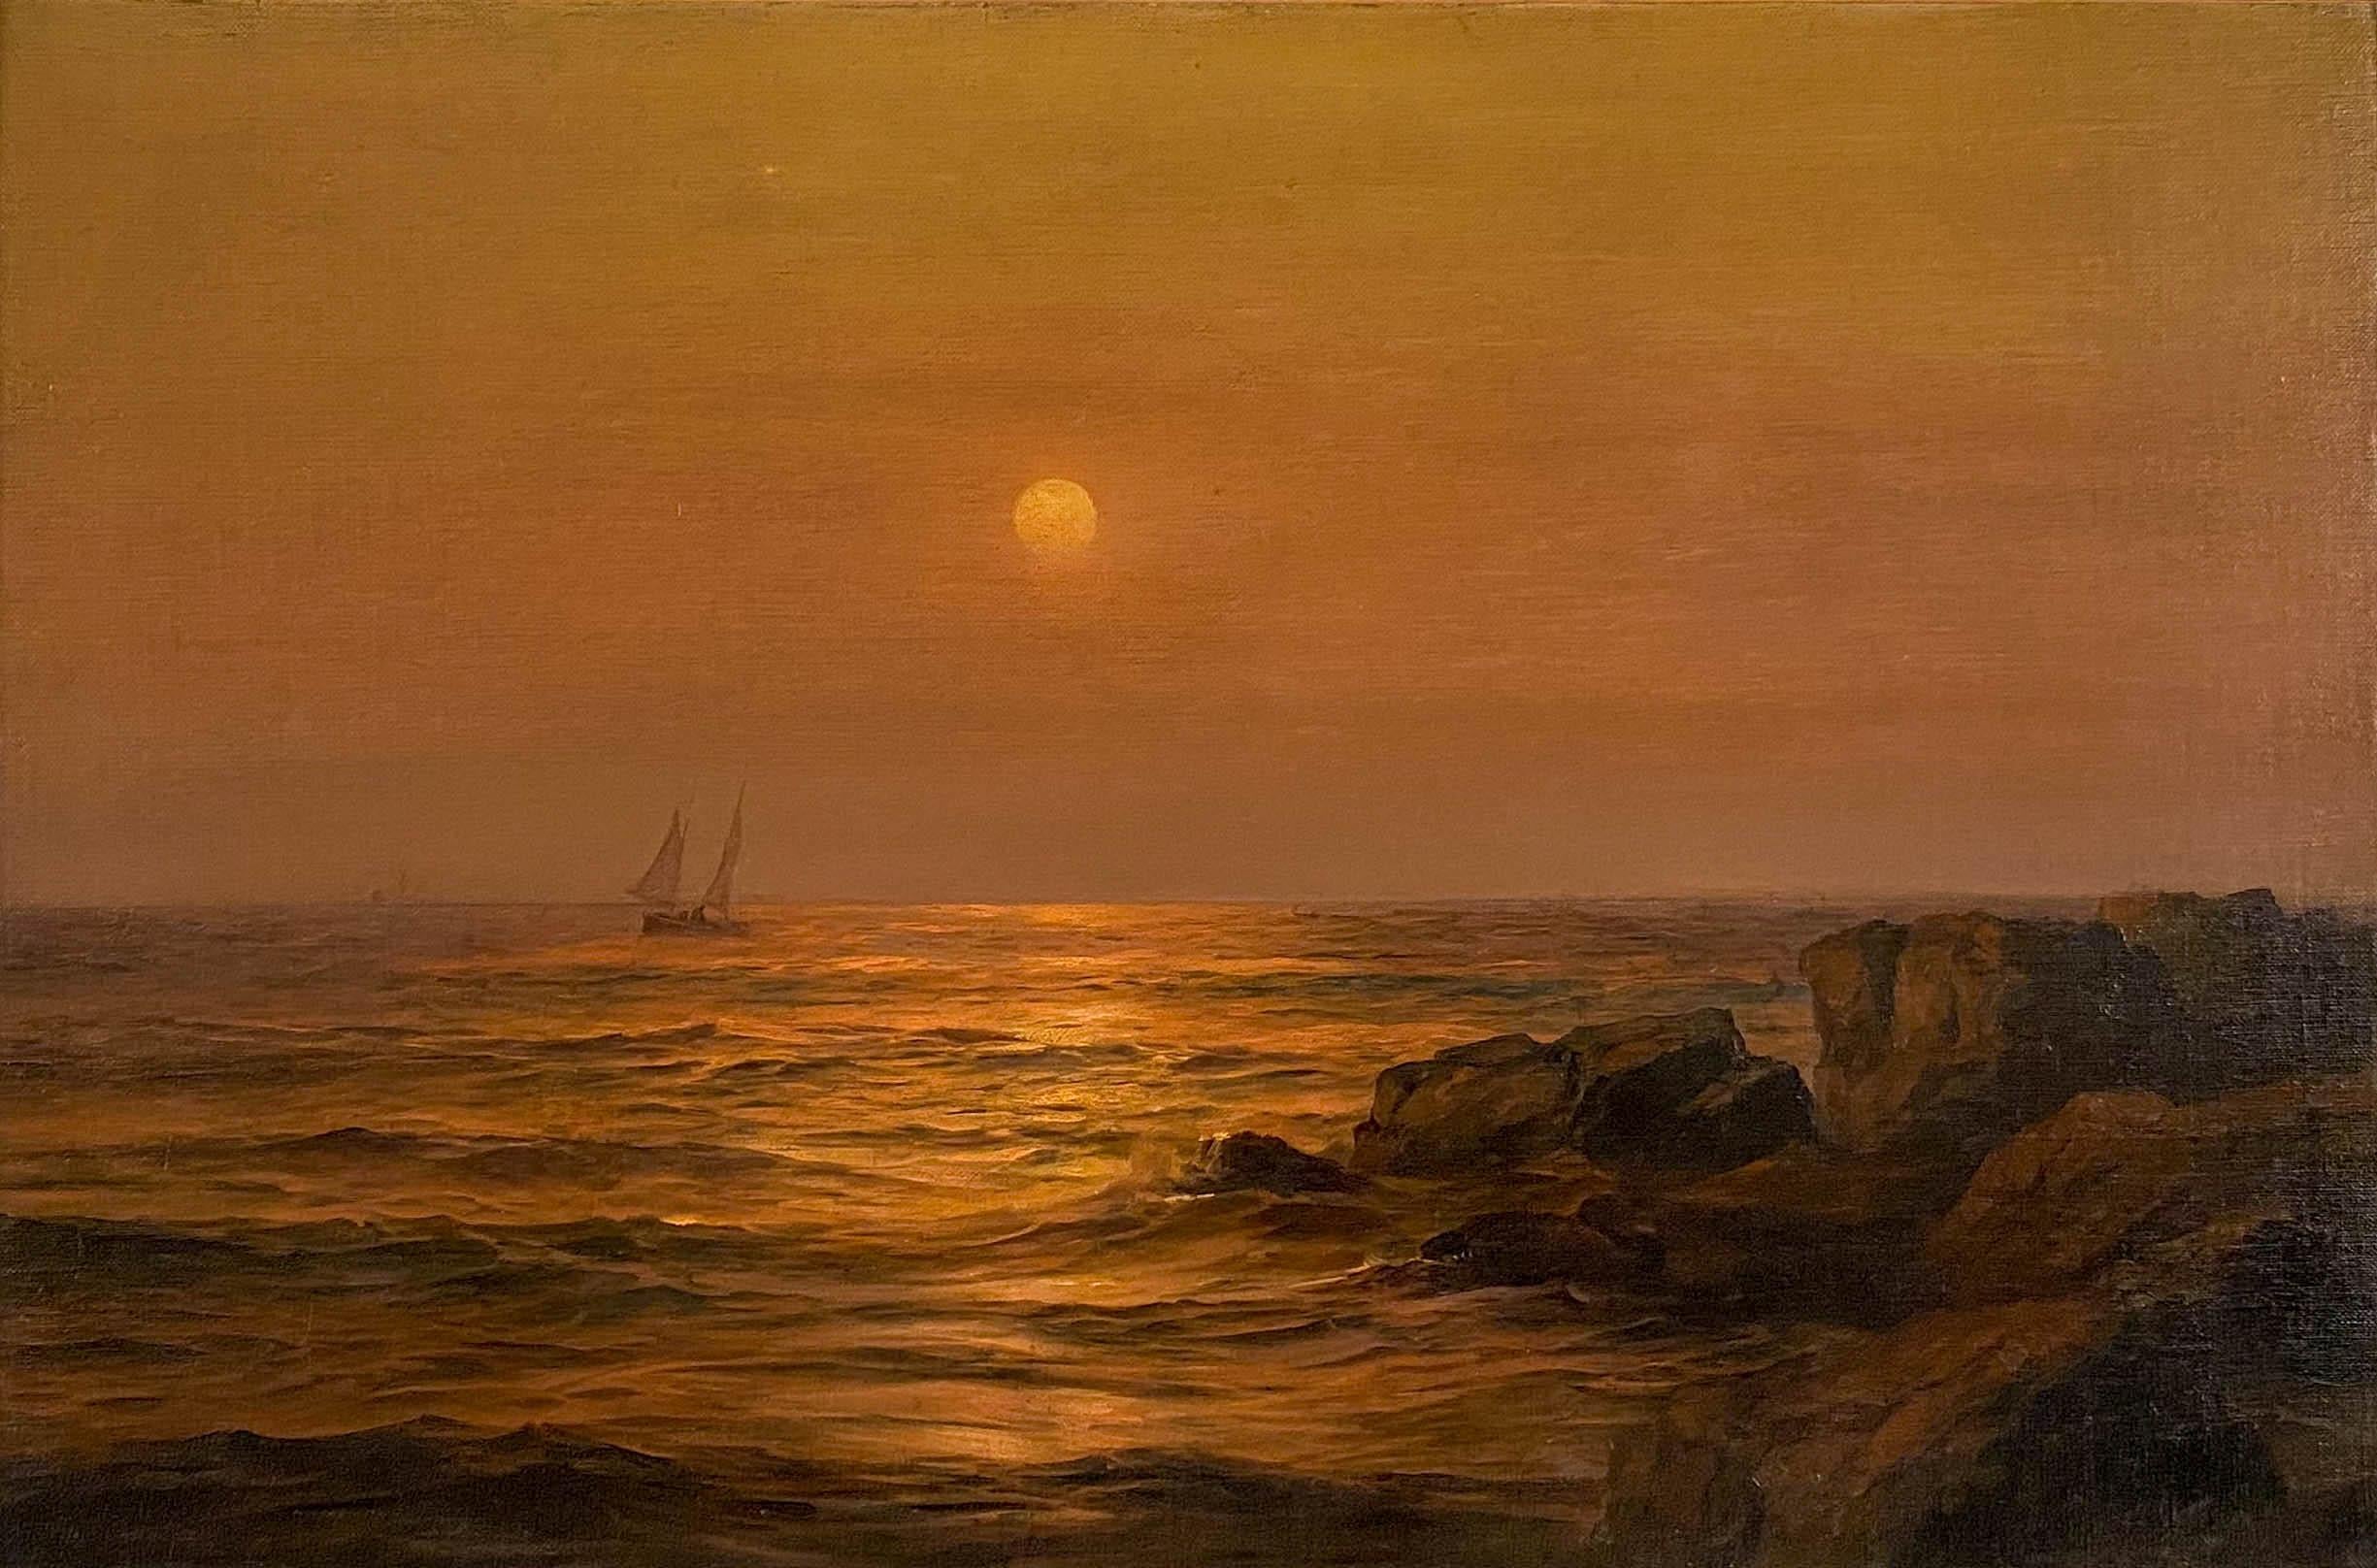 Ship at Sunset - Painting by Warren W. Sheppard